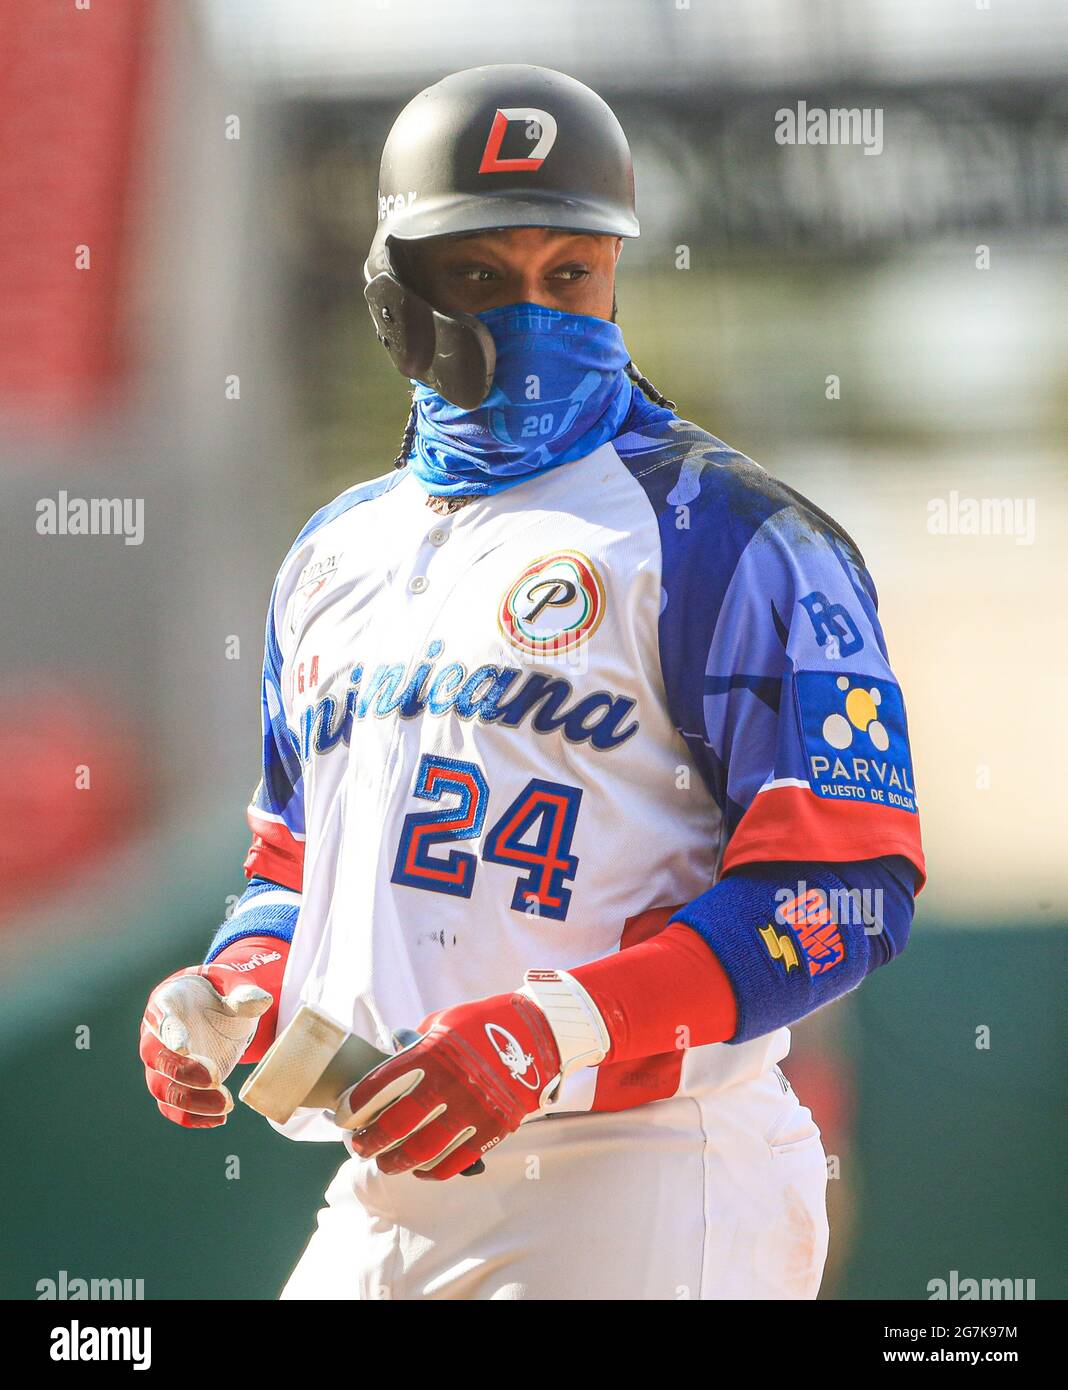 MAZATLAN, MEXICO - JANUARY 31: Robinson Cano for Águilas Cibaeñas ,during  the game between Puerto Rico and Dominican Republic as part of Serie del  Caribe 2021 at Teodoro Mariscal Stadium on January